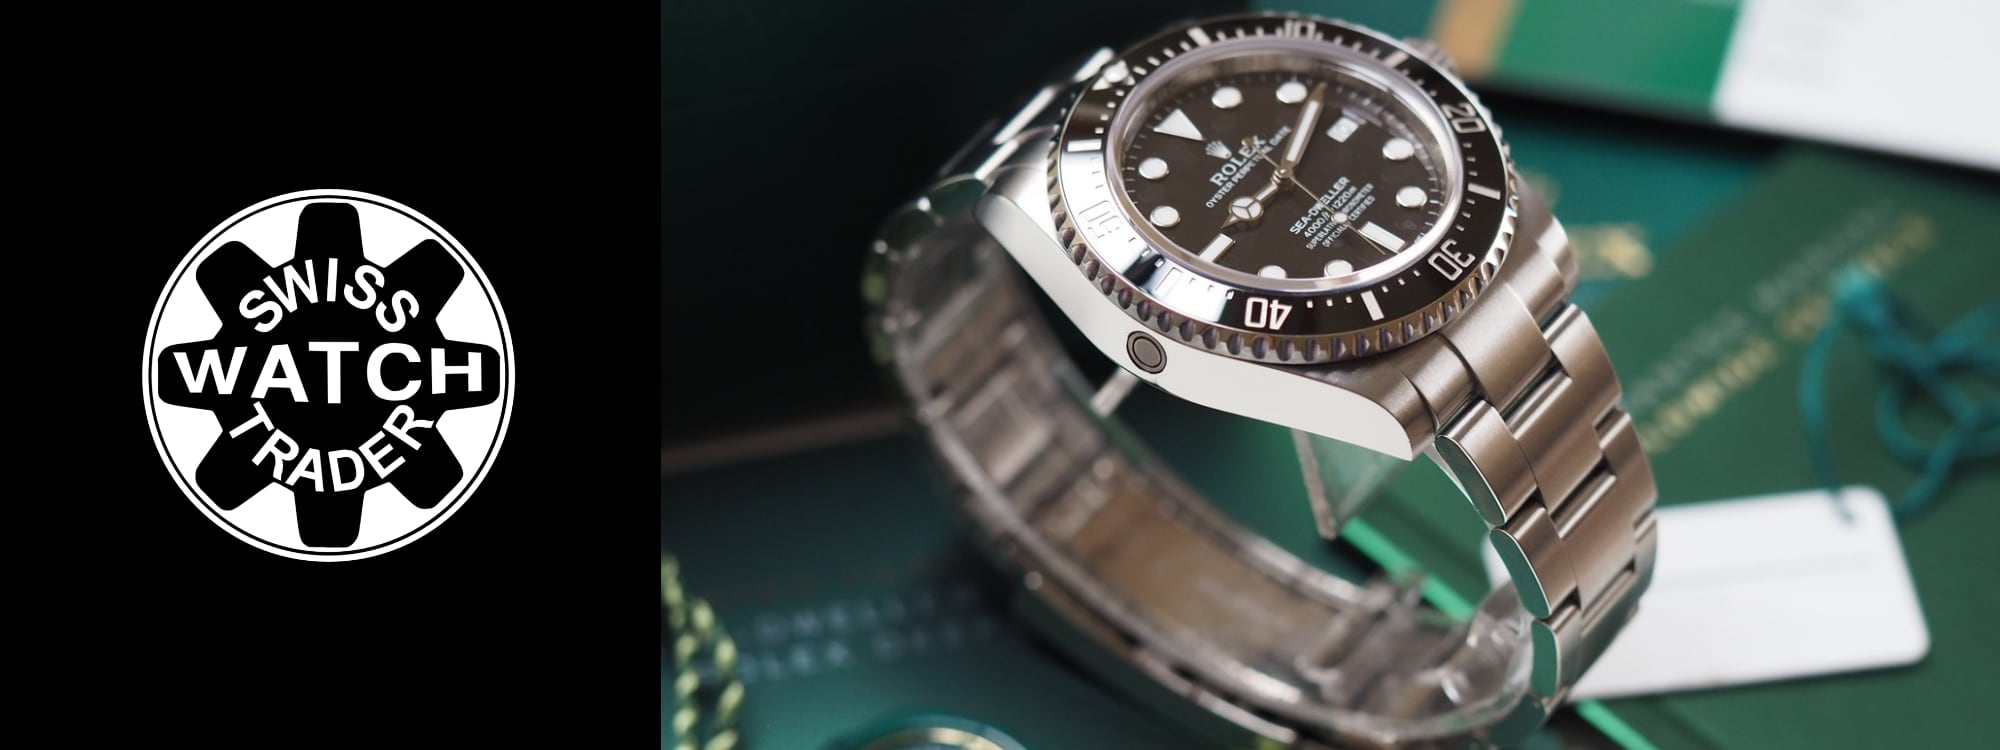 Brink Flygtig tyk Rolex Sea Dweller 116600 SD4000 | Our 5 Minute Review